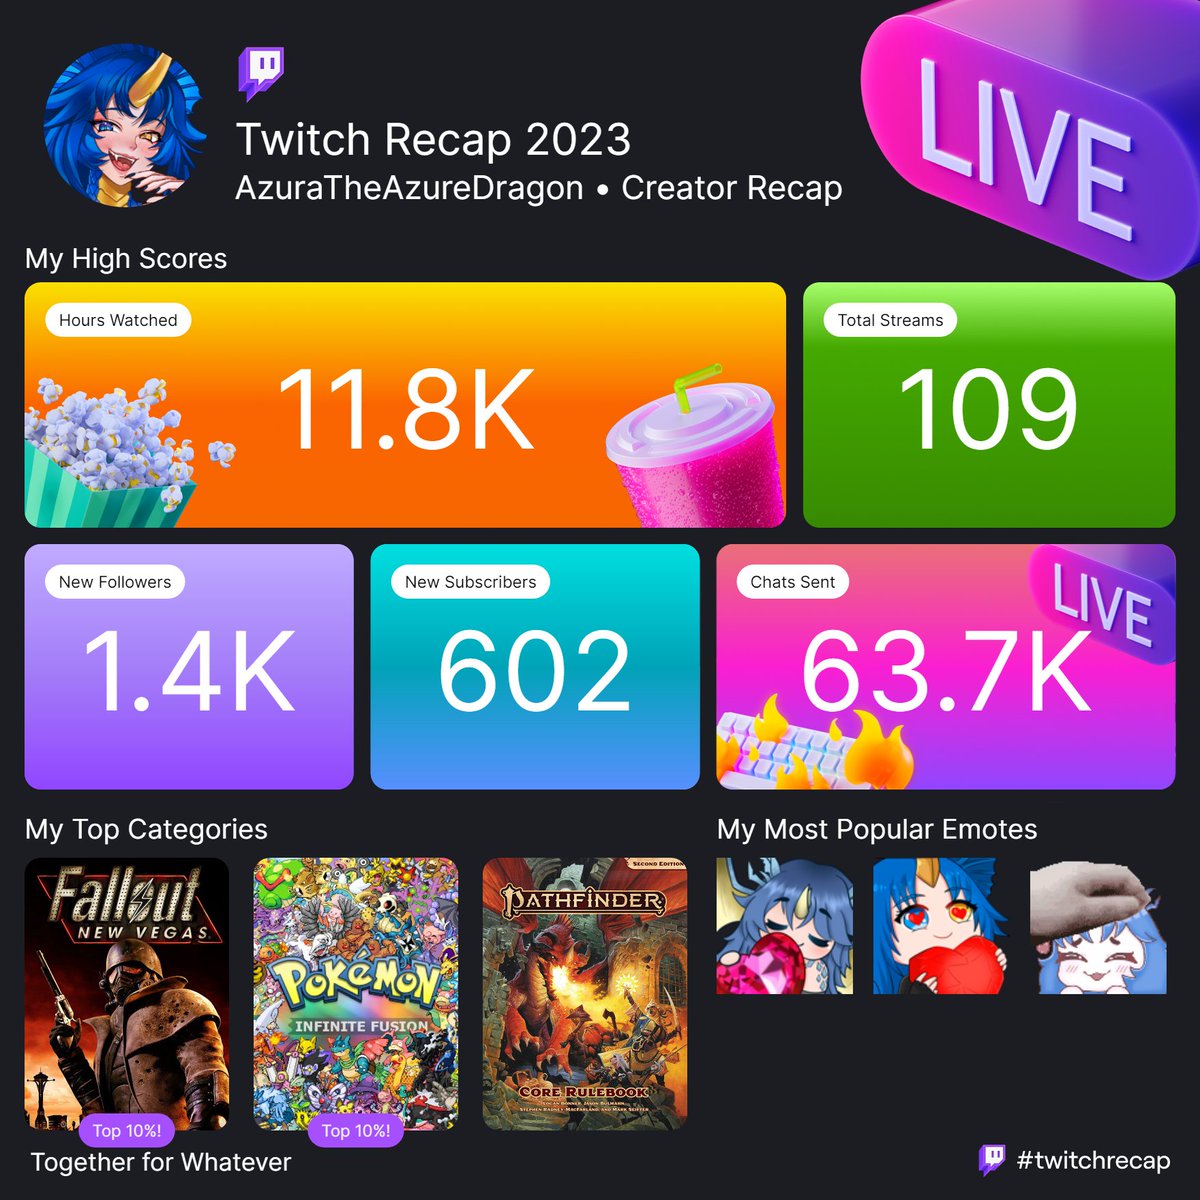 Y'know, 109 streams is alot of streams to do within the space of a year! I'm happy with this 🥹 

So many new followers and people who came in to chat with me during the goofy streams, thank you everyone for being there with my on this journey 💙
#TwitchRecap2023